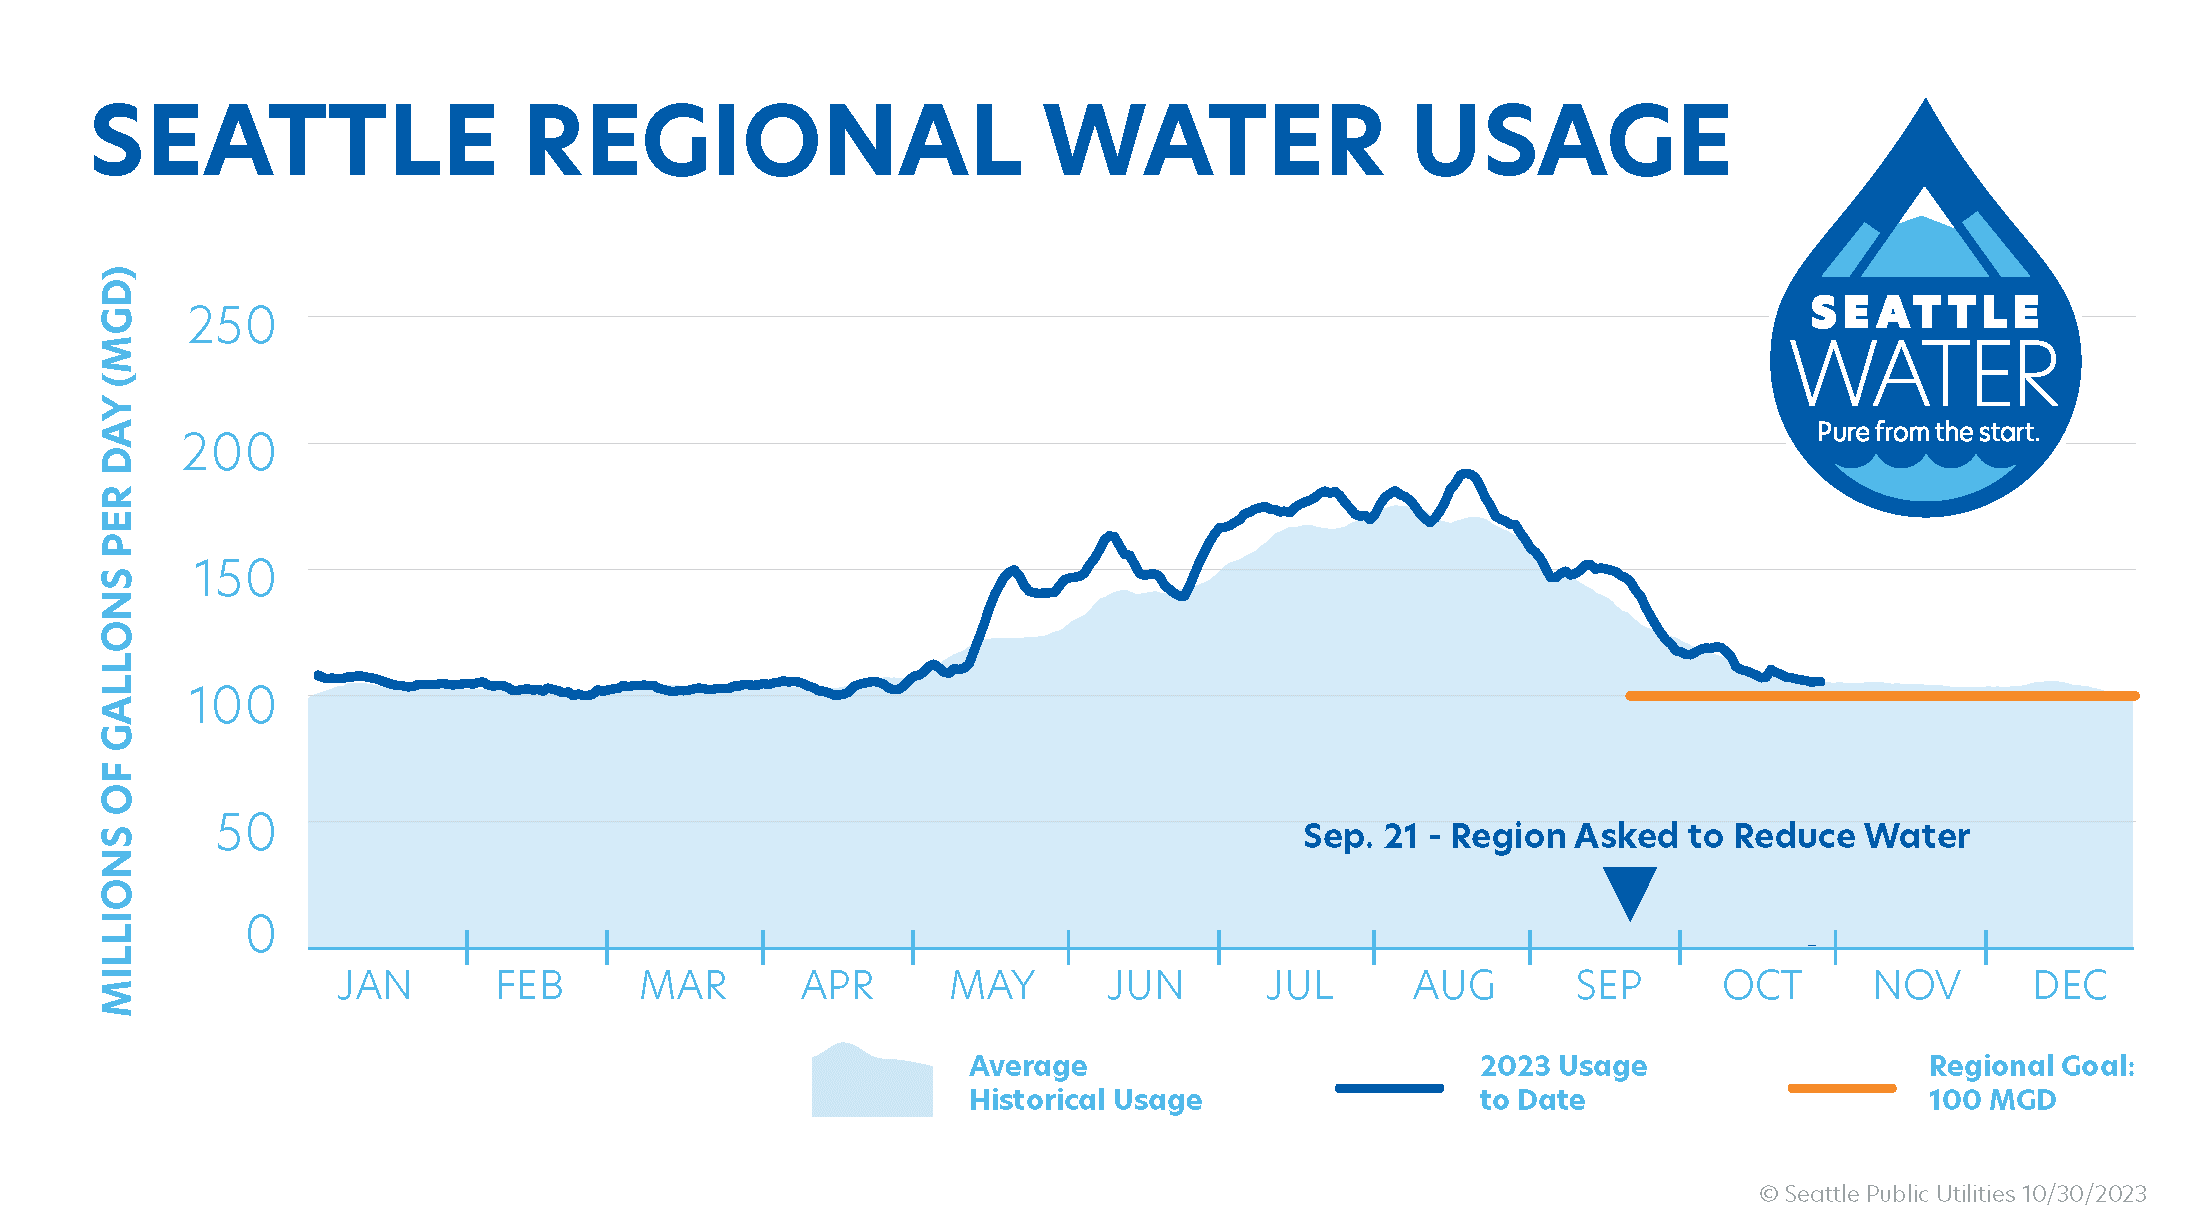 Graph of historic average water usage, 2023 usage to date, and the regional goal, showing usage getting closer to the goal.